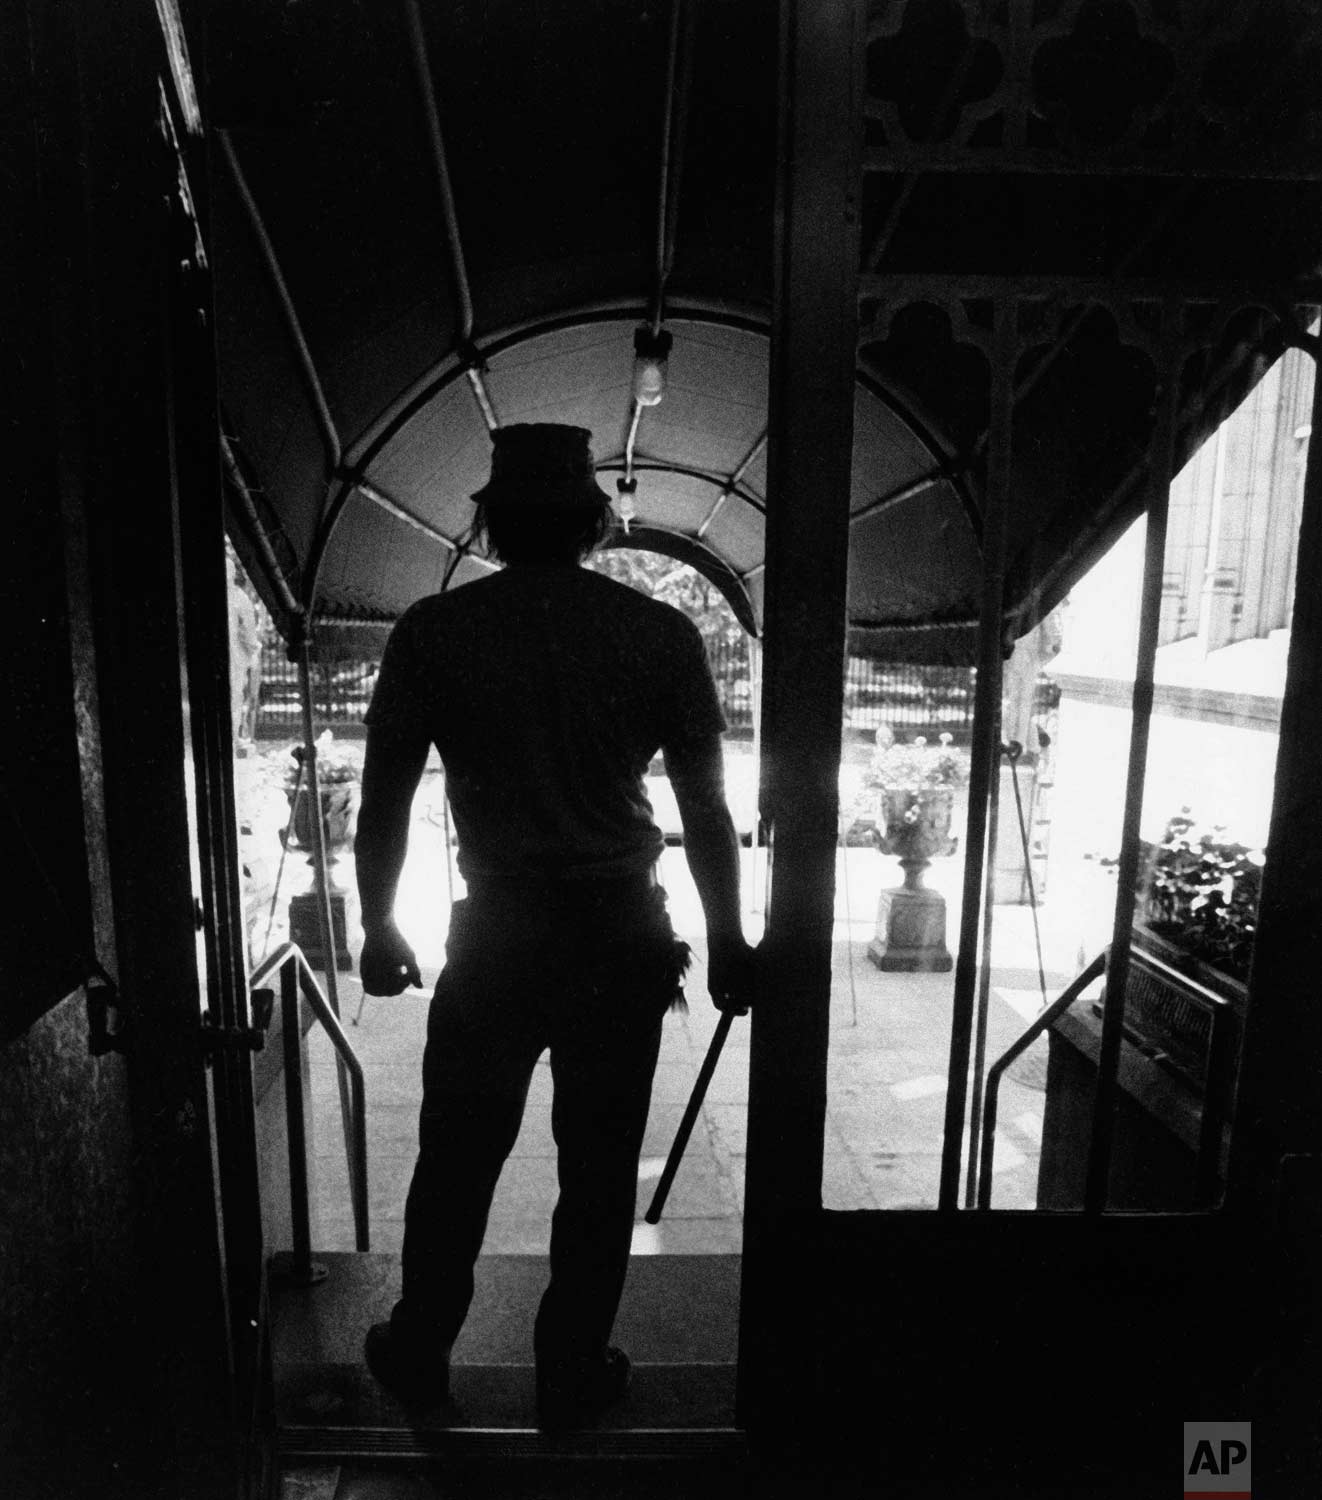  A doorman on New York's Gramercy Park arms himself with a nightstick as a preventative measure following the blackout of New York, July 14, 1977. Looting was continuing in the city Thursday. (AP Photo) 